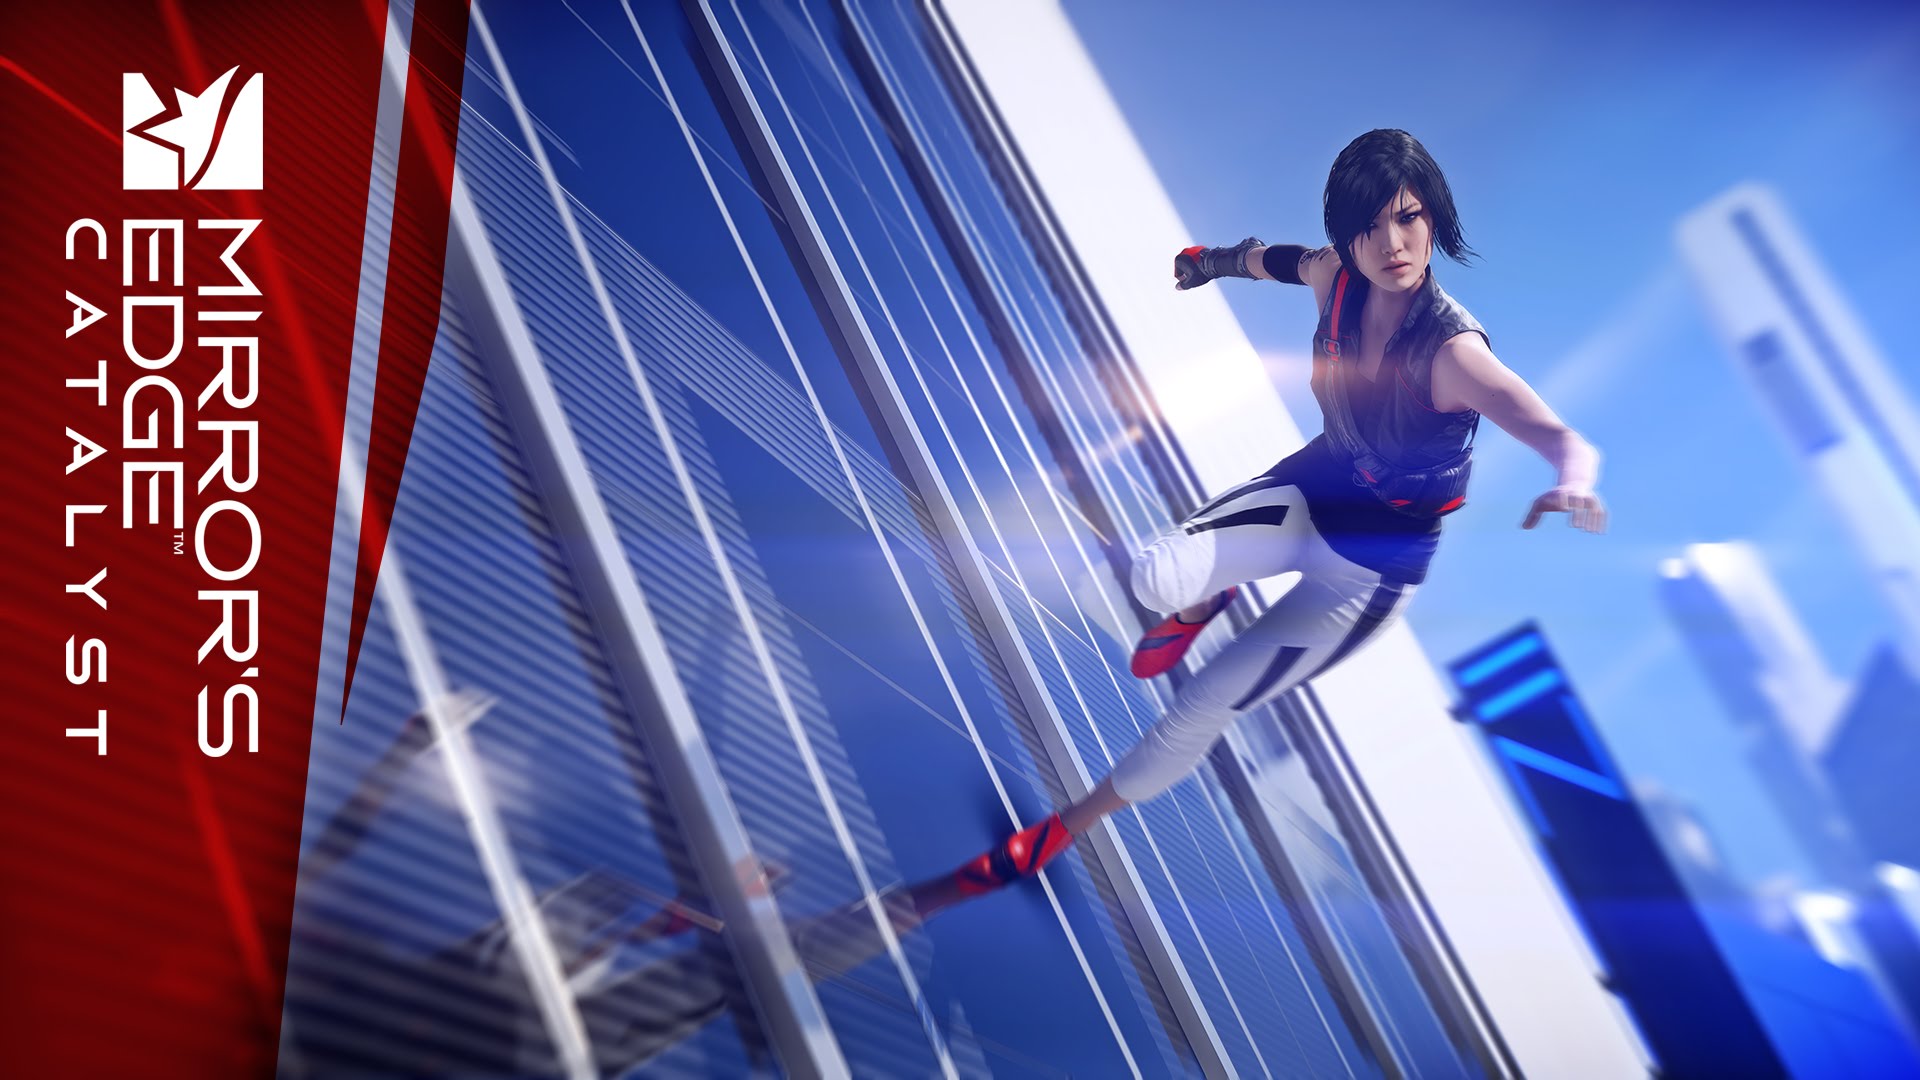 The Creation of Mirror's Edge Catalyst Levels